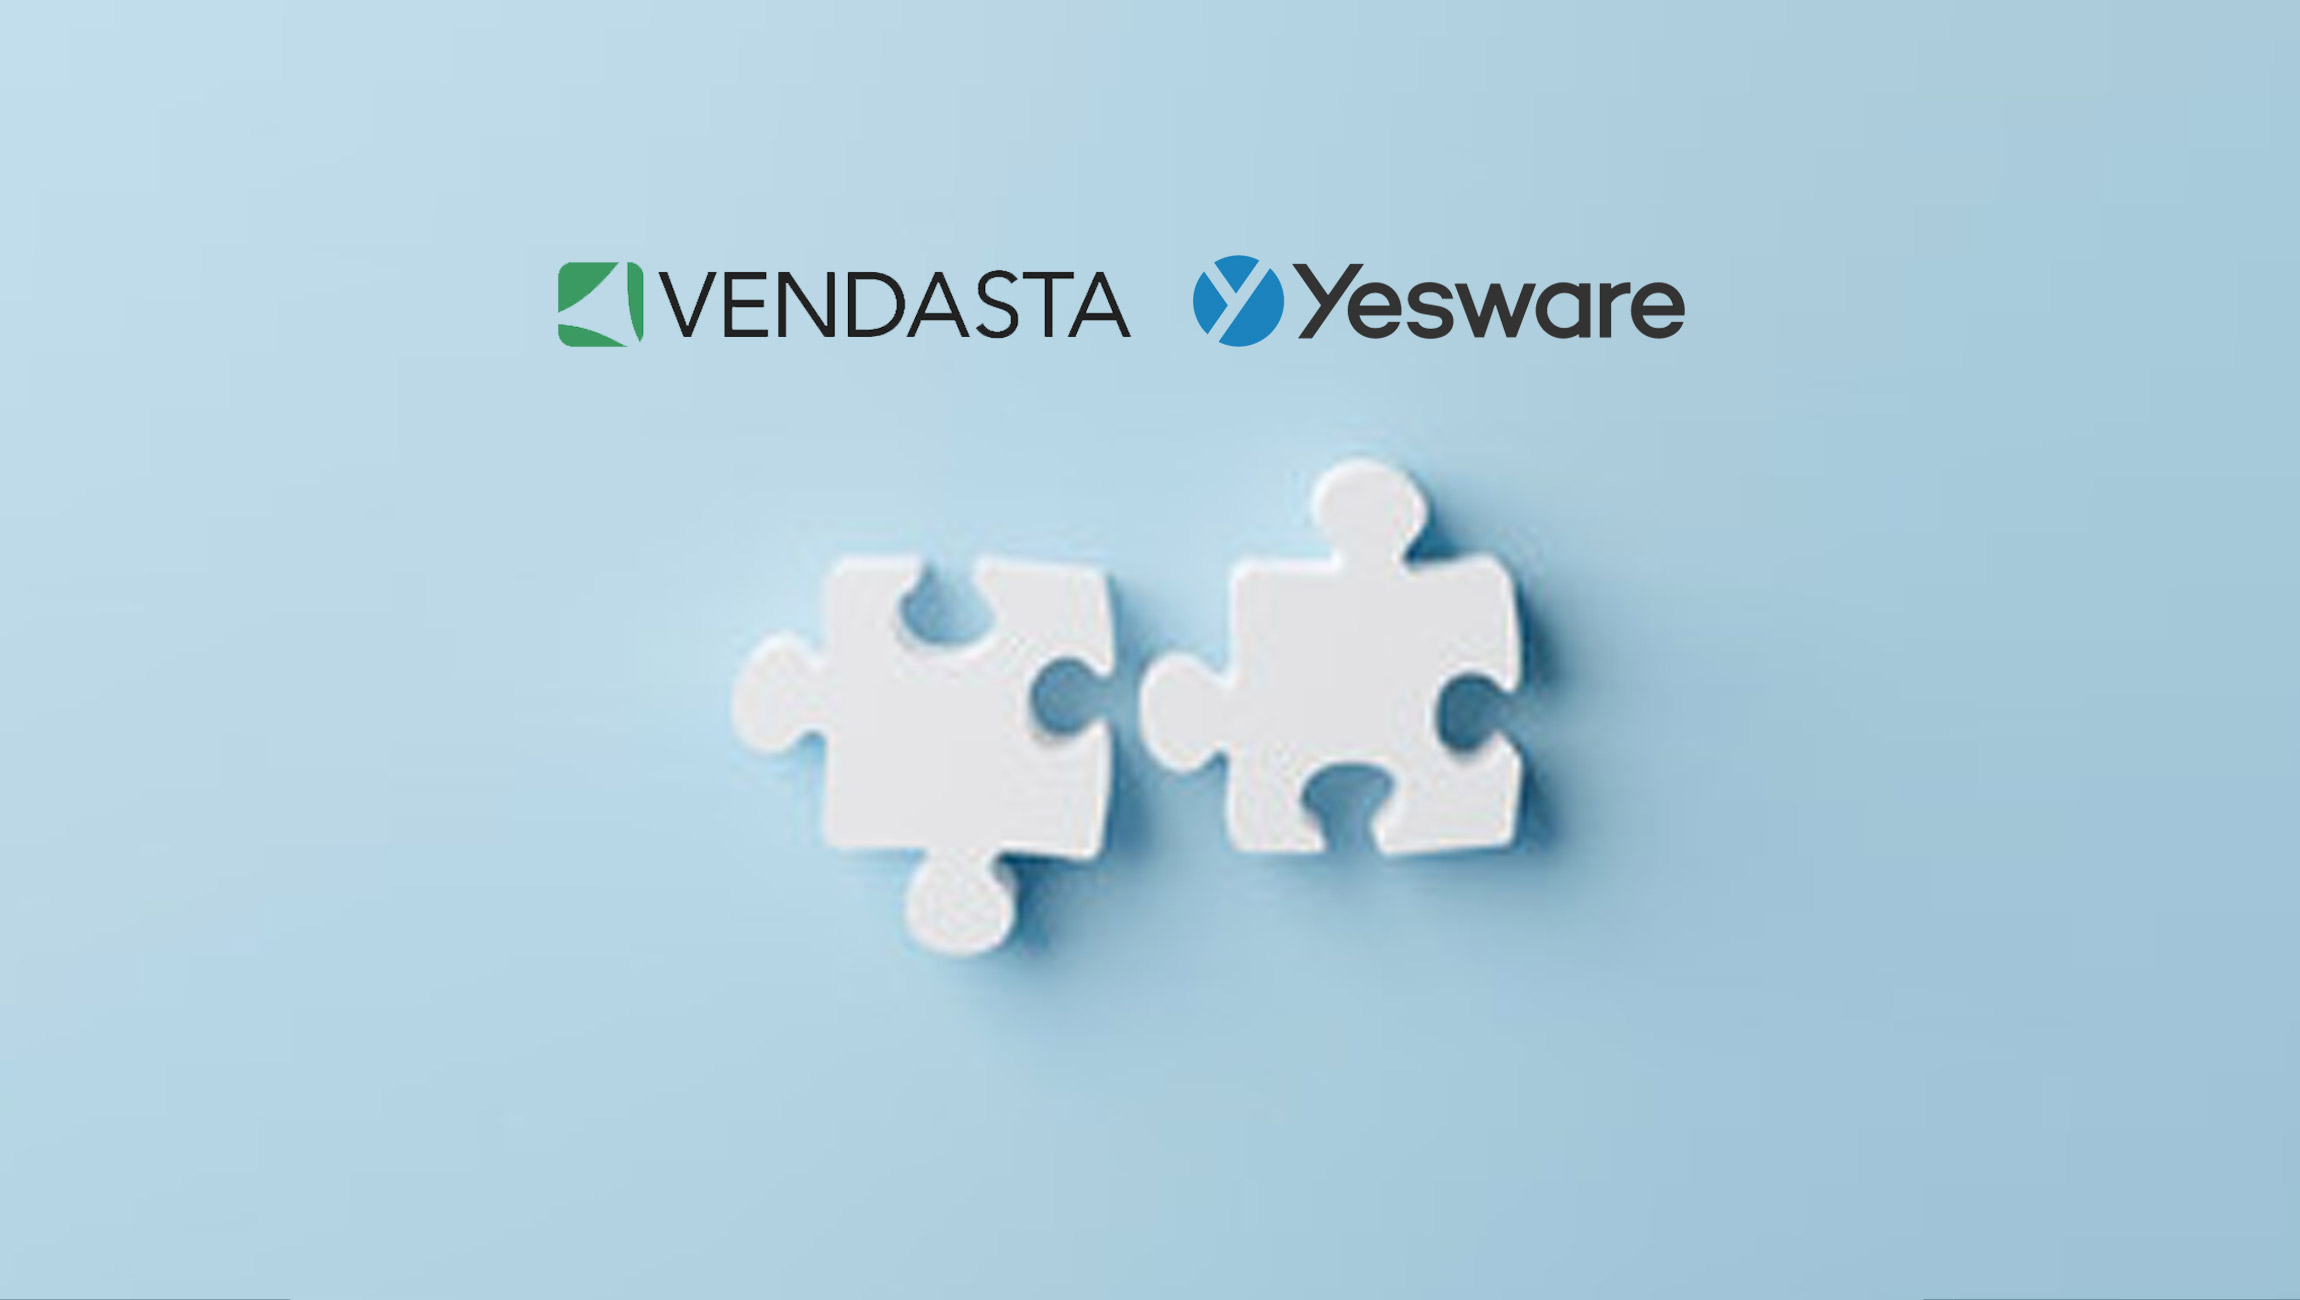 Vendasta Acquires Yesware To Bring To Market Best-In-Class Sales Engagement Platform